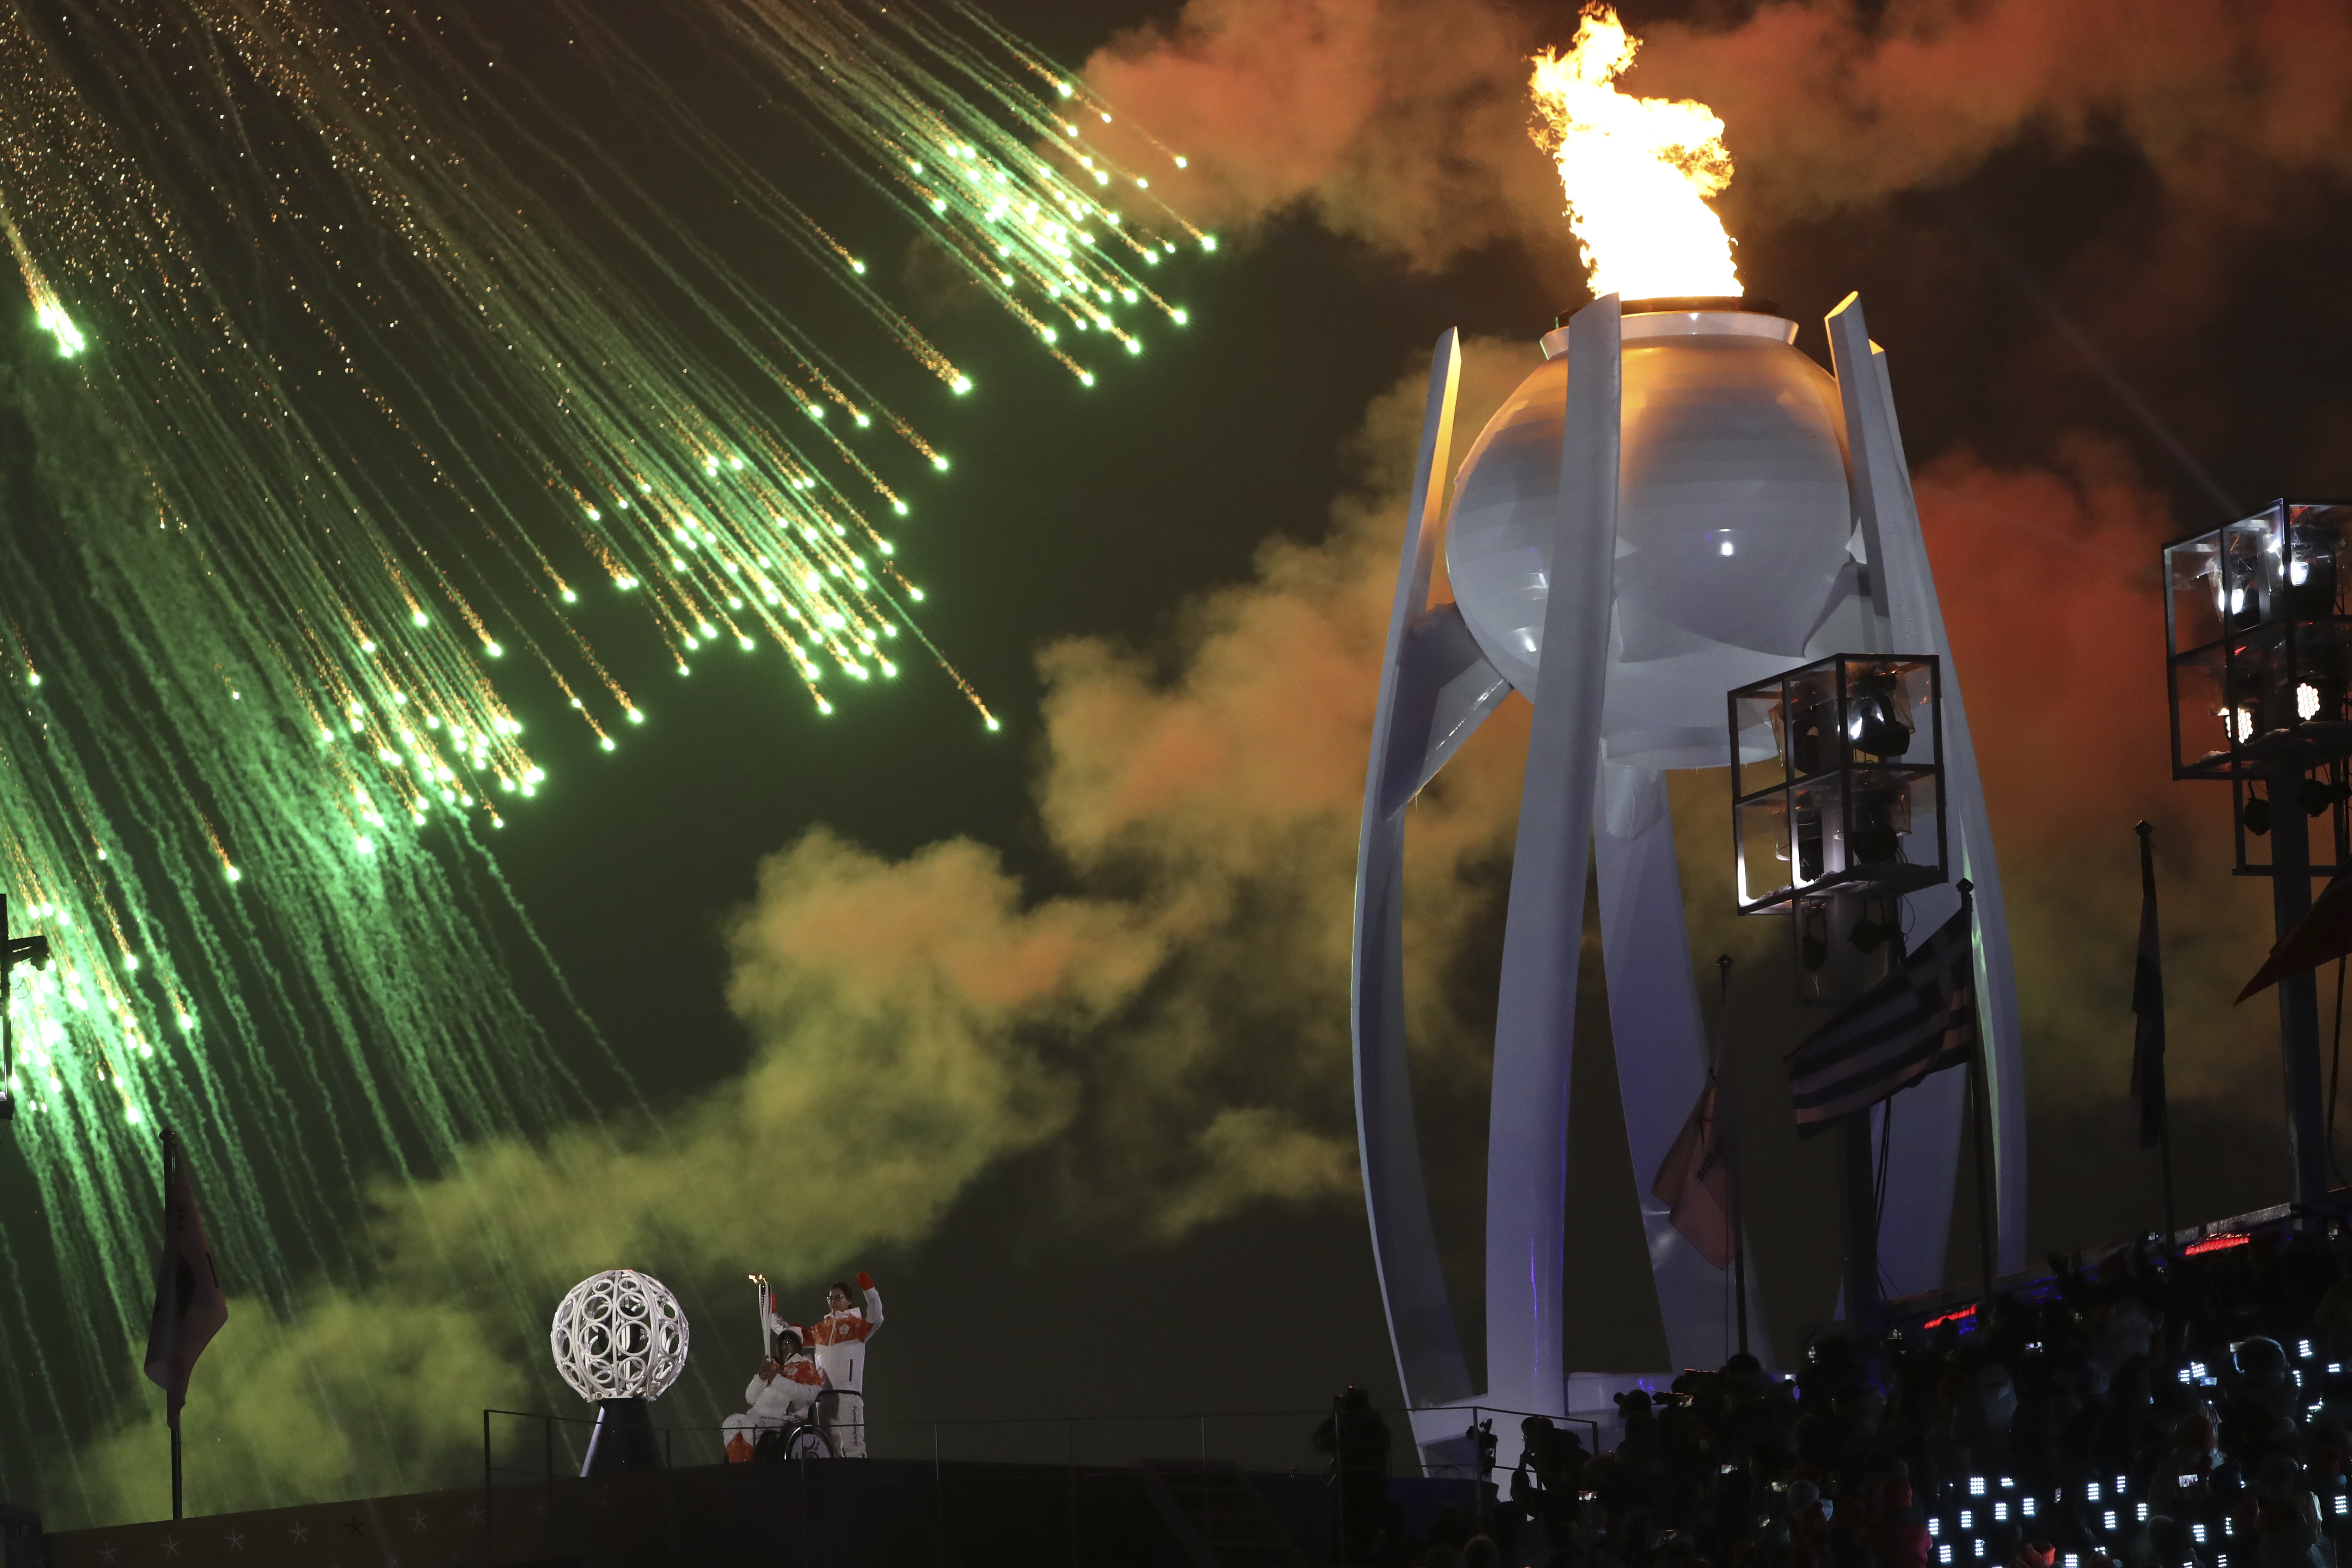 The Paralympic Cauldron is lit during the opening ceremony of the Pyeongchang 2018 Winter Paralympic Games at the Pyeongchang Stadium in Pyeongchang, South Korea, Friday, March 9, 2018. (AP Photo/Ng Han Guan)